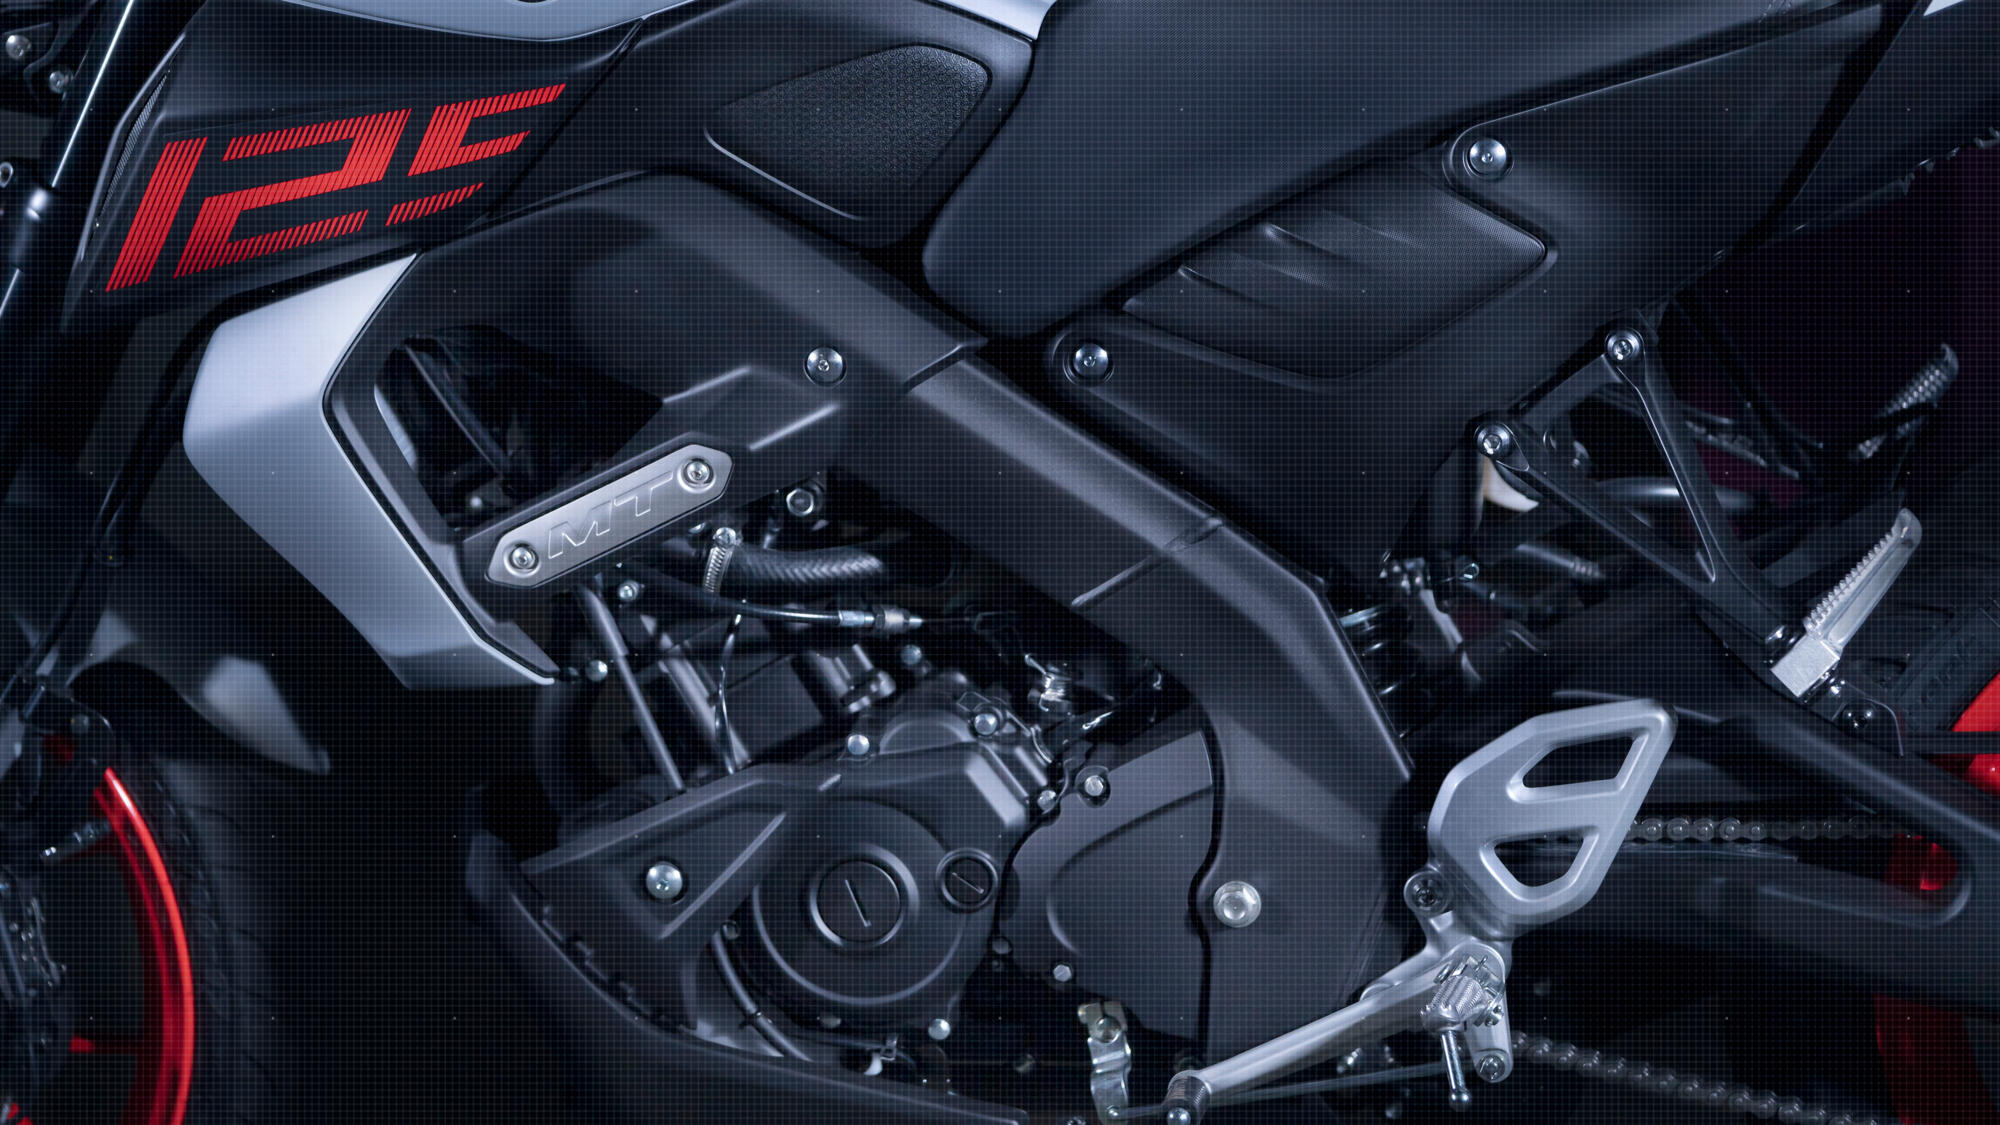 2020 Yamaha MT-125 Officially Unveiled; India Launch Possible - background